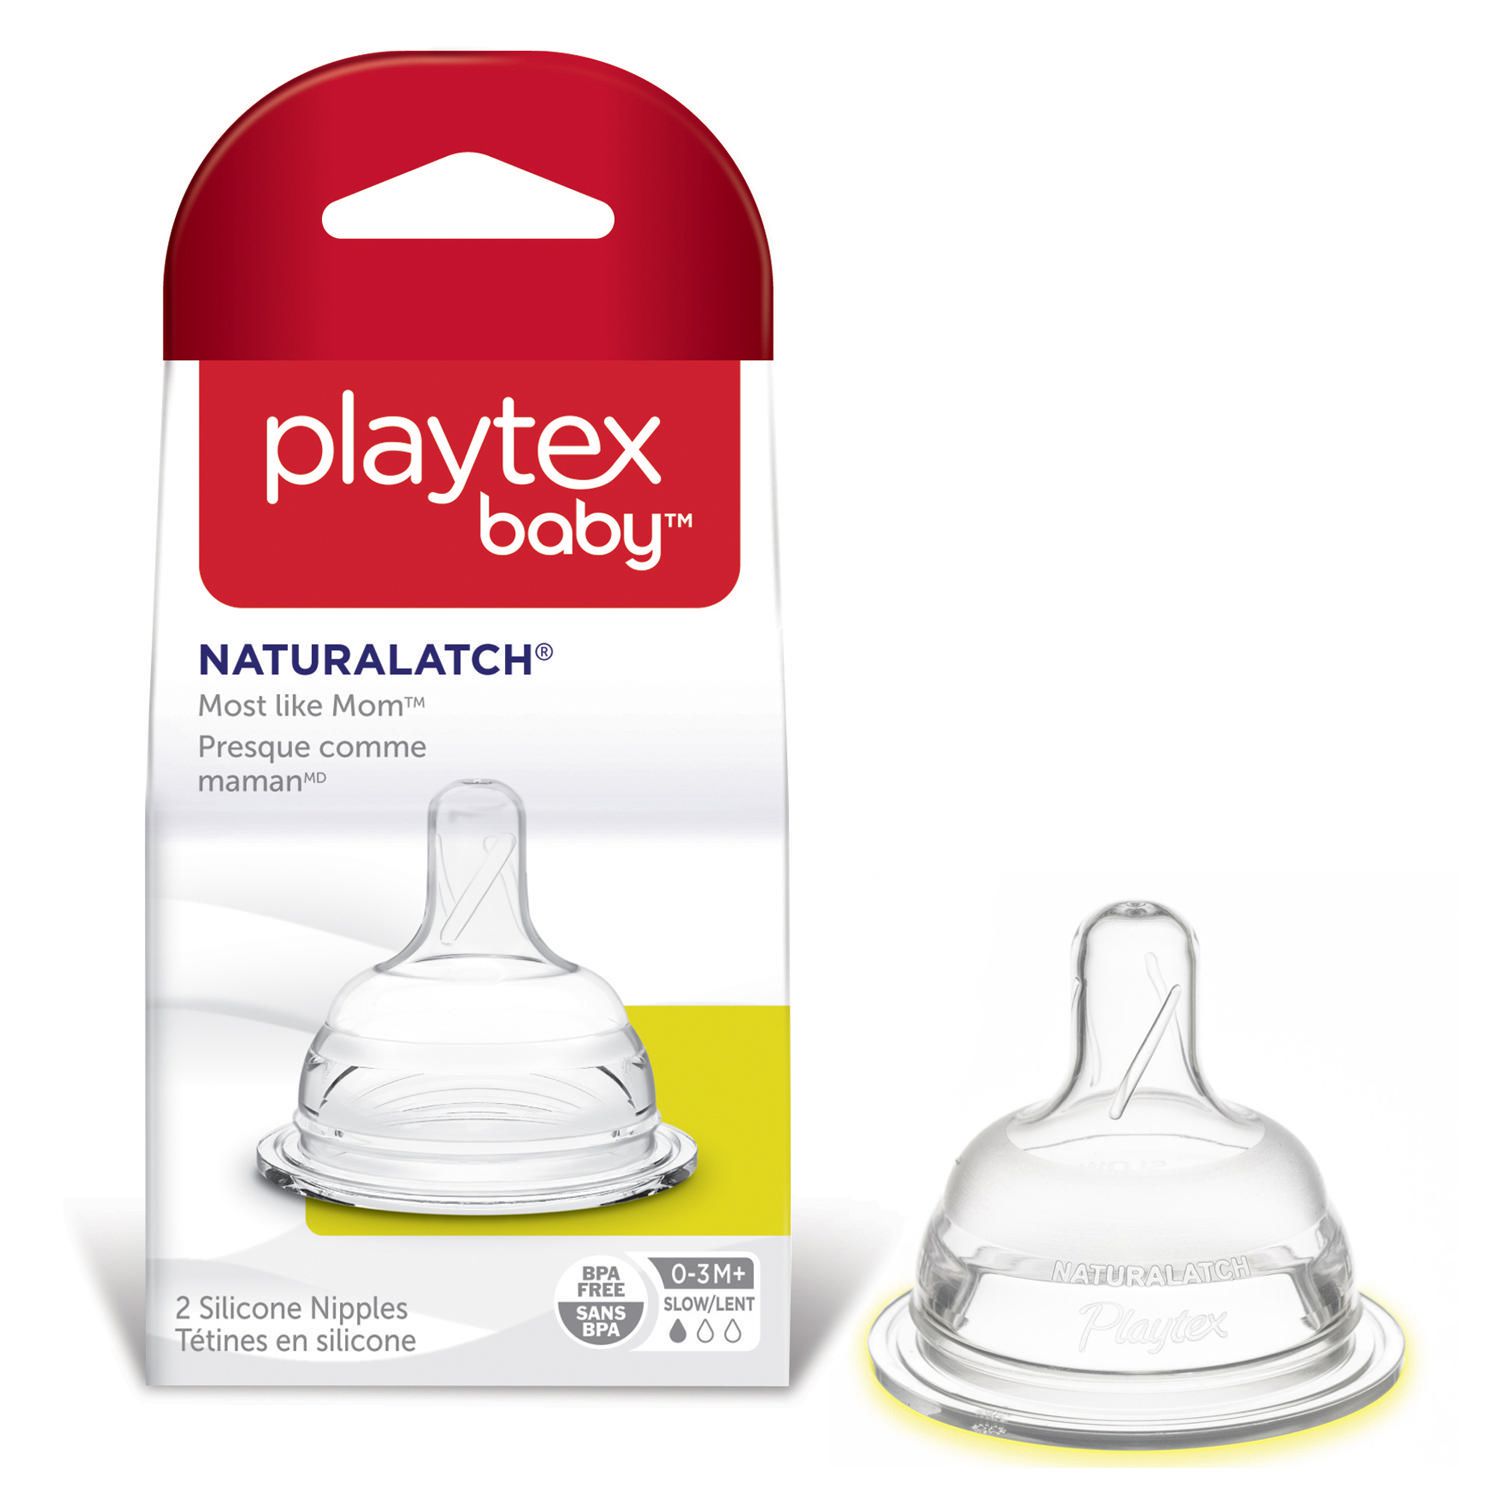 MONTHS FAST FLOW NEW 6 PLAYTEX NATURALATCH SILICONE BABY BOTTLE NIPPLES 3-6 